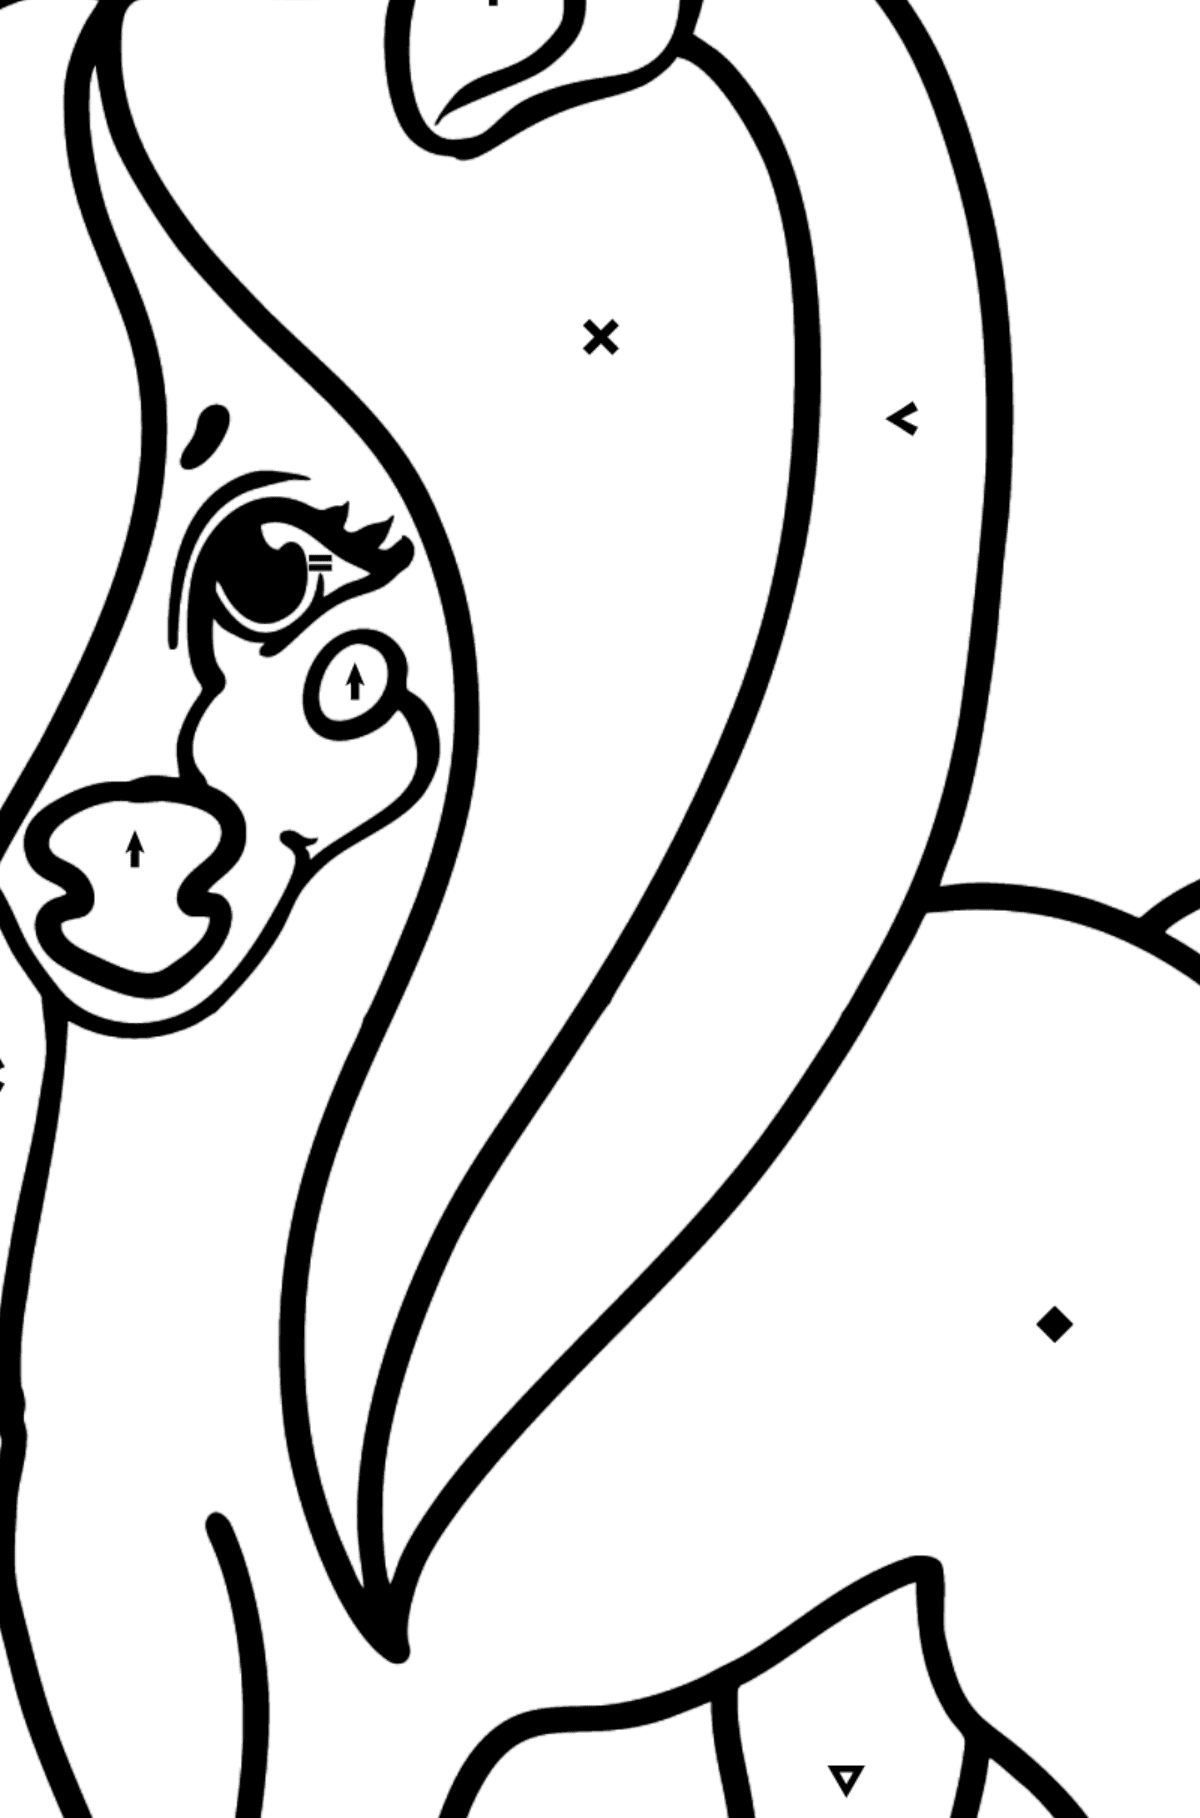 Pony Princess coloring page - Coloring by Symbols for Kids